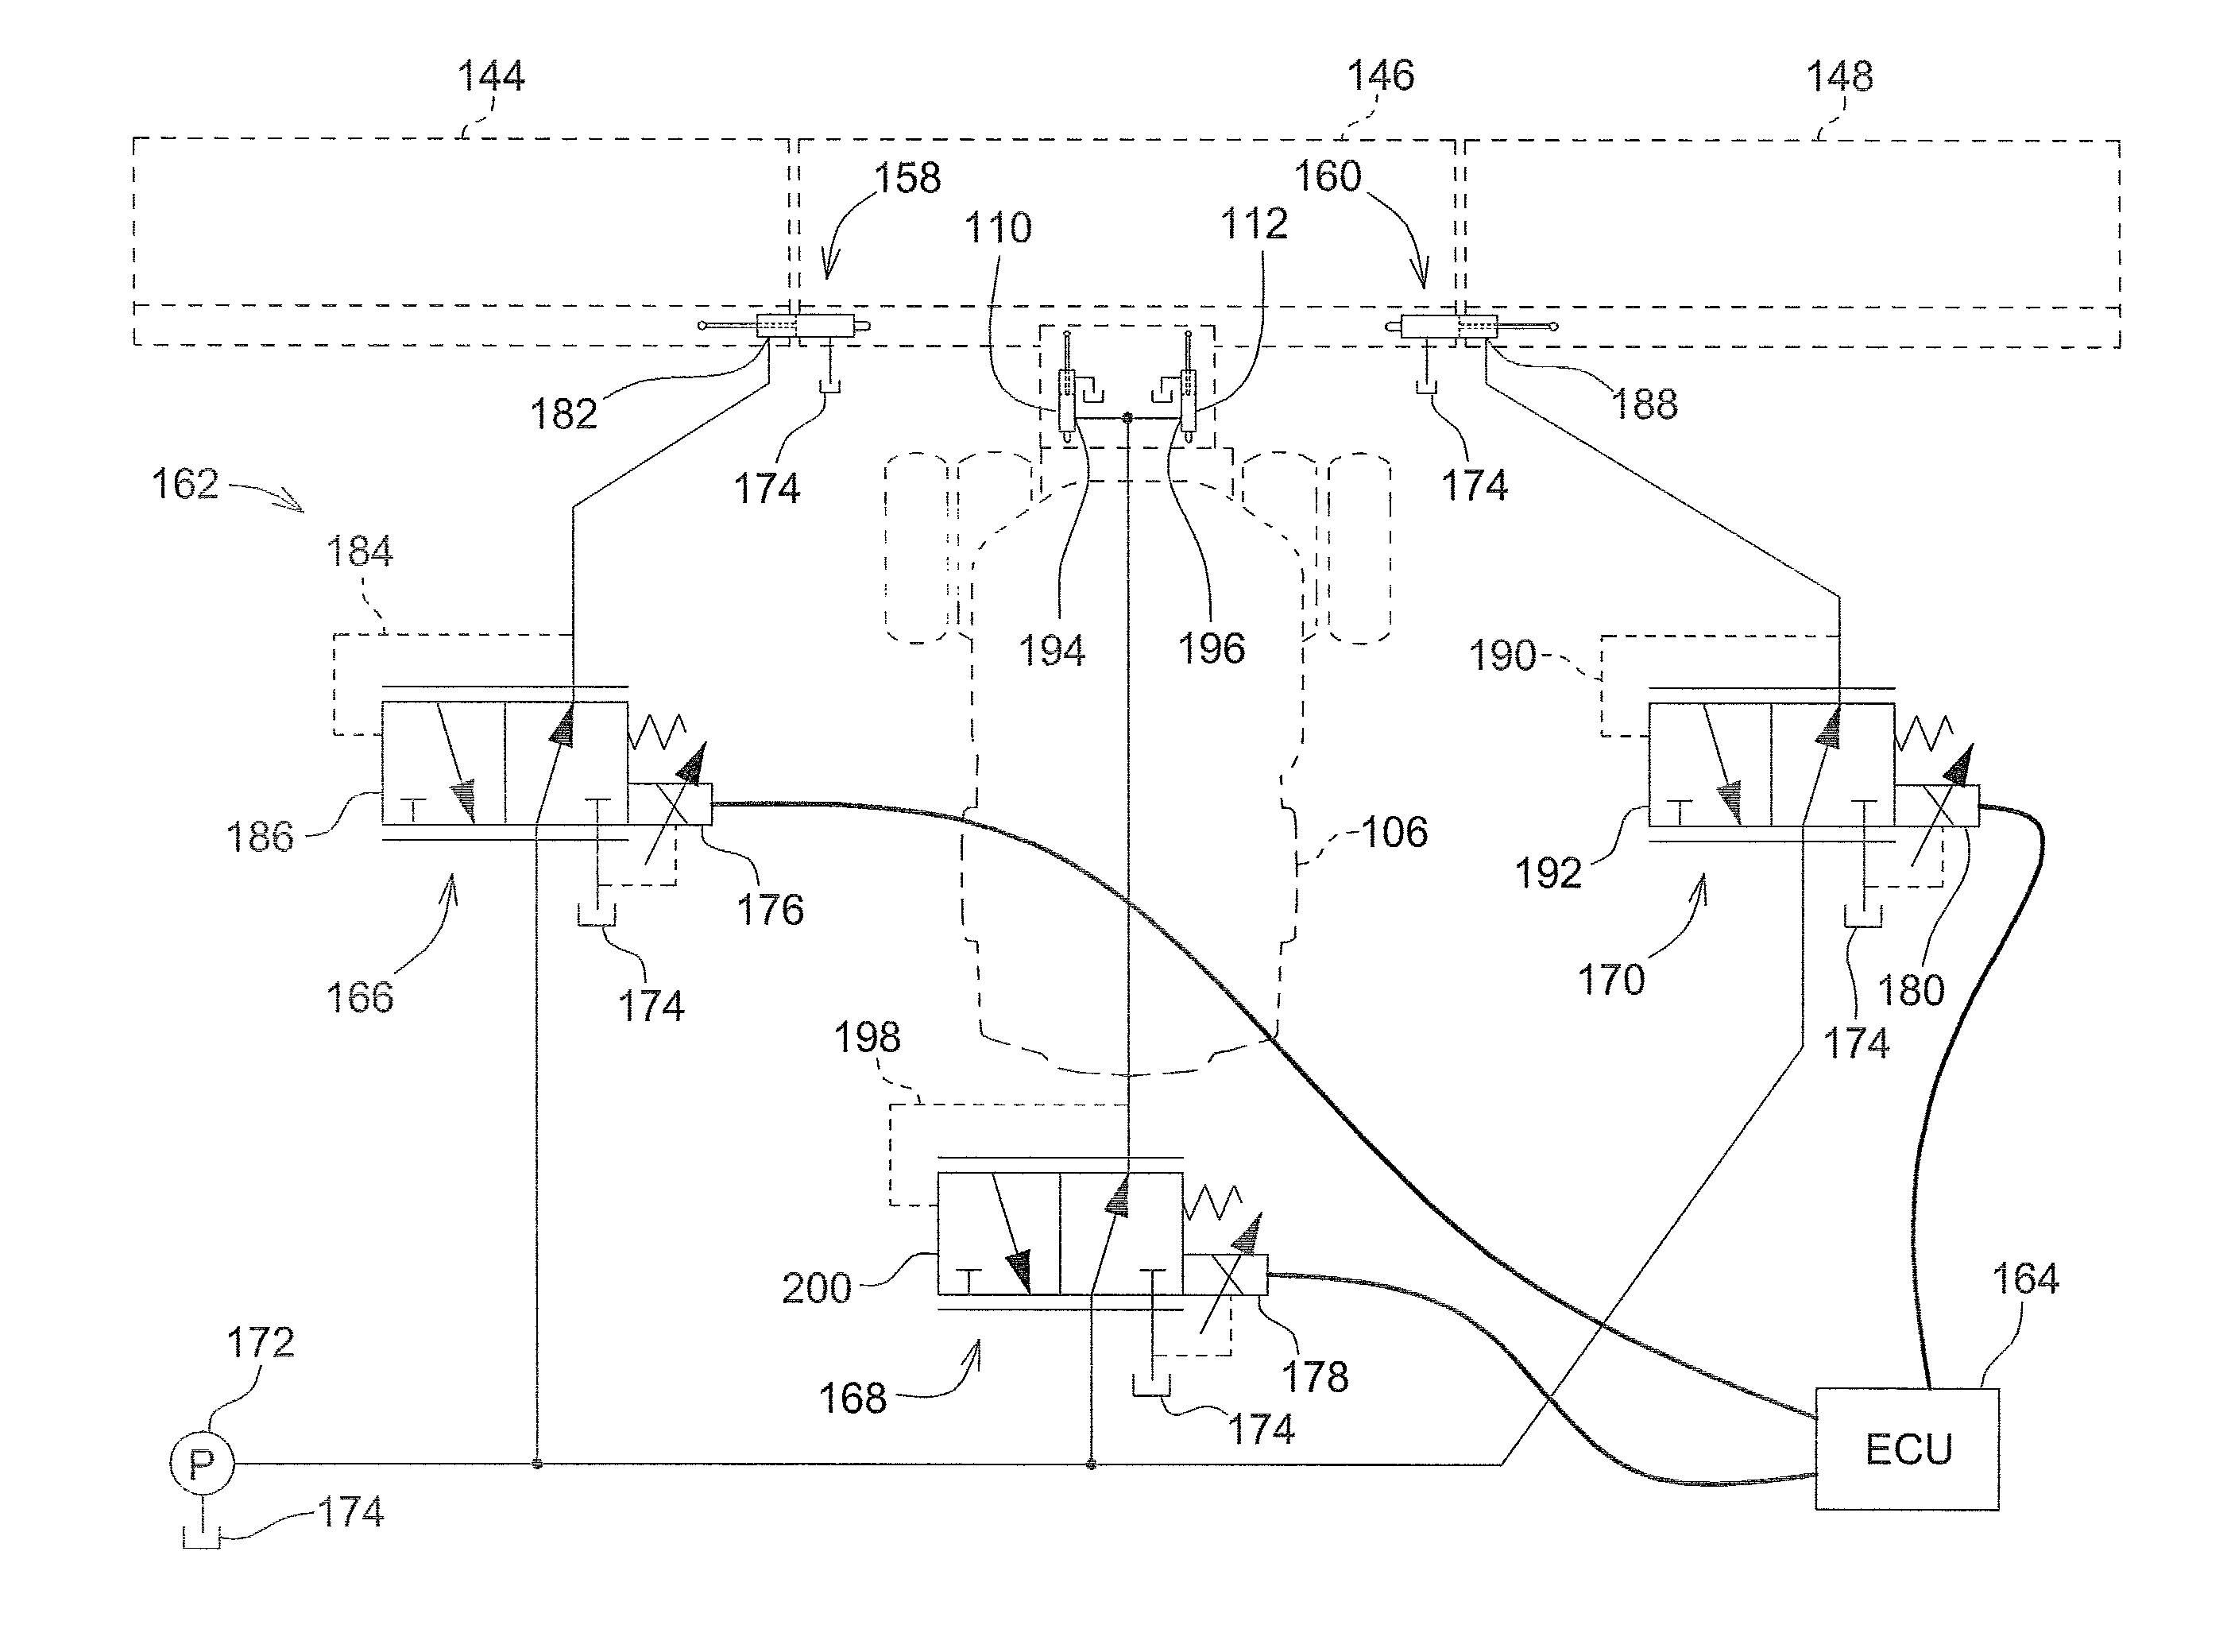 Articulated harvesting head ground force control circuit